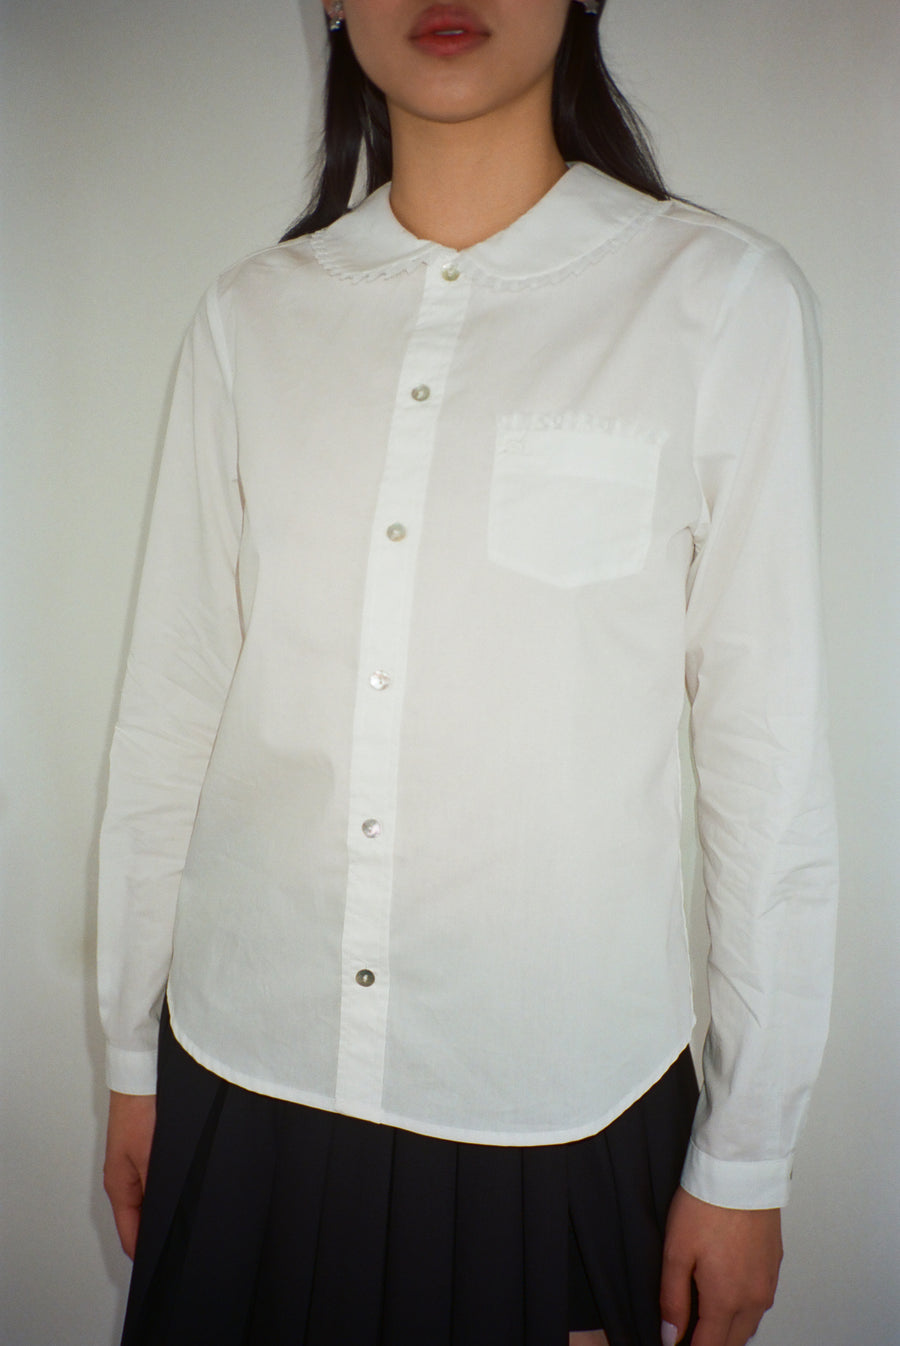 Long sleeve button up collared shirt with lace detail in white on model